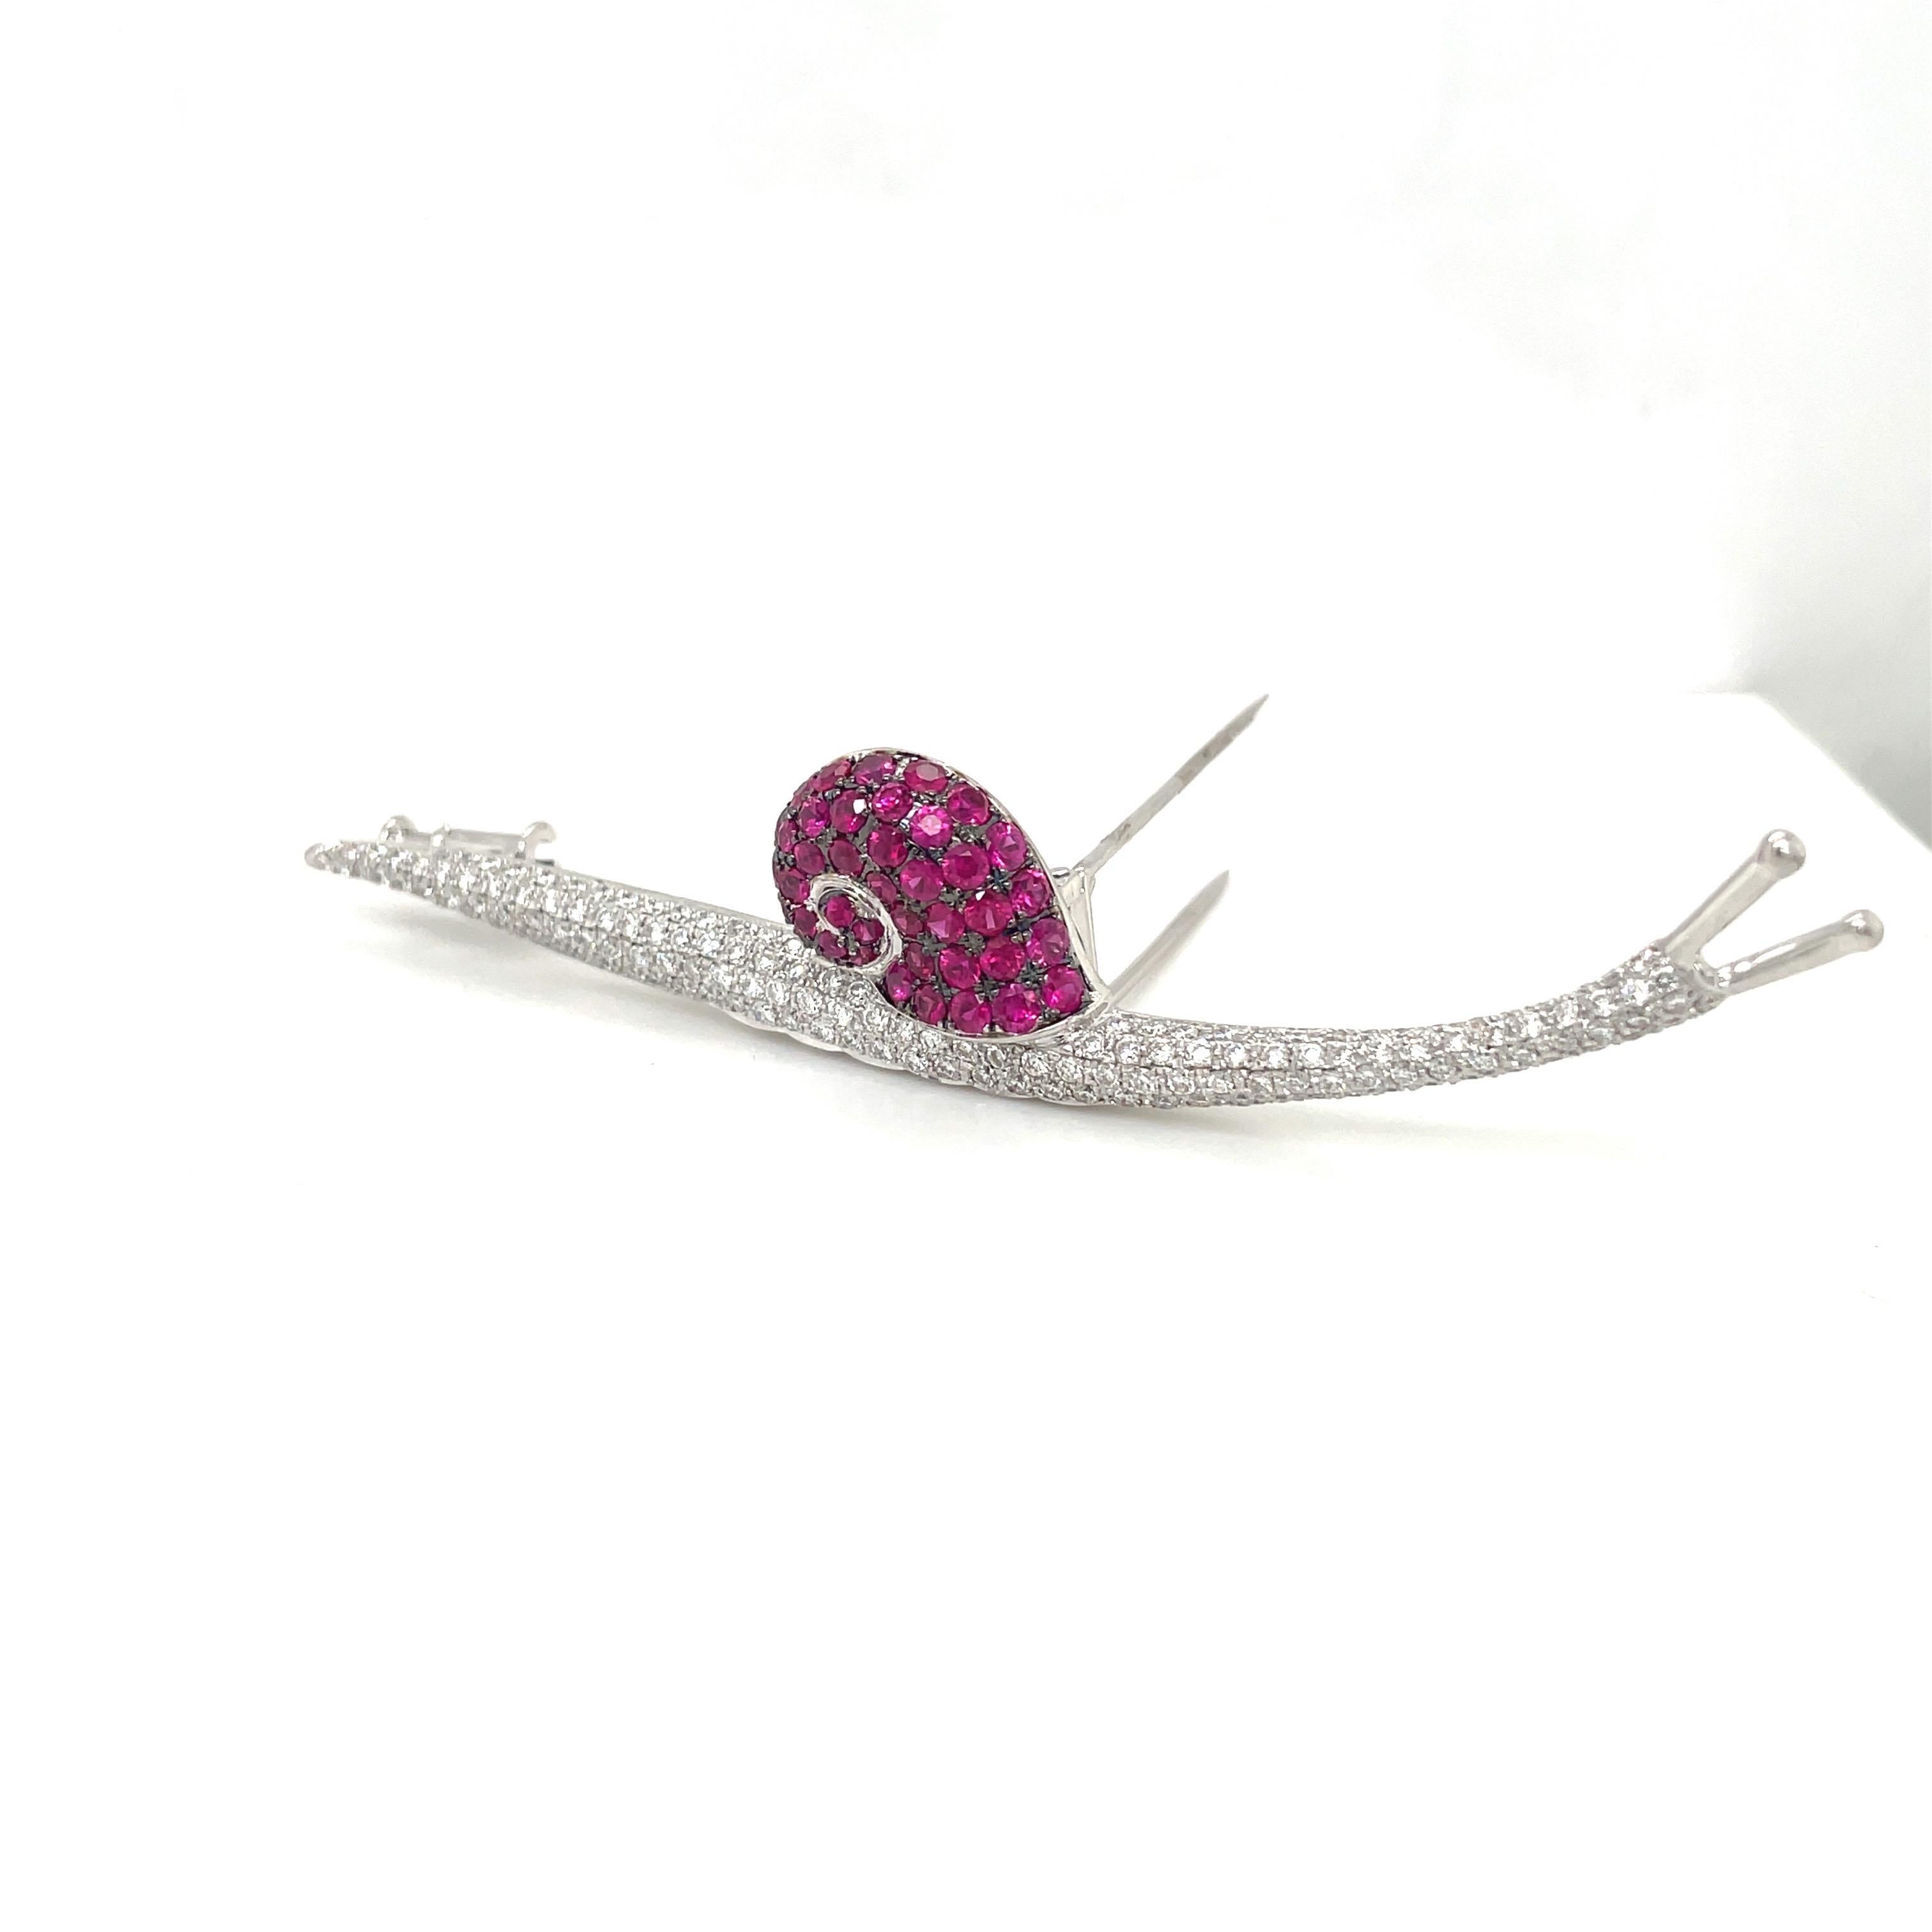 Lovely snail brooch ,artistically designed in 18 karat white gold. The body is set with 1.80 carats of round brilliant diamonds, and the shell is set with 2.50 carats of round rubies. The snail is 3.25